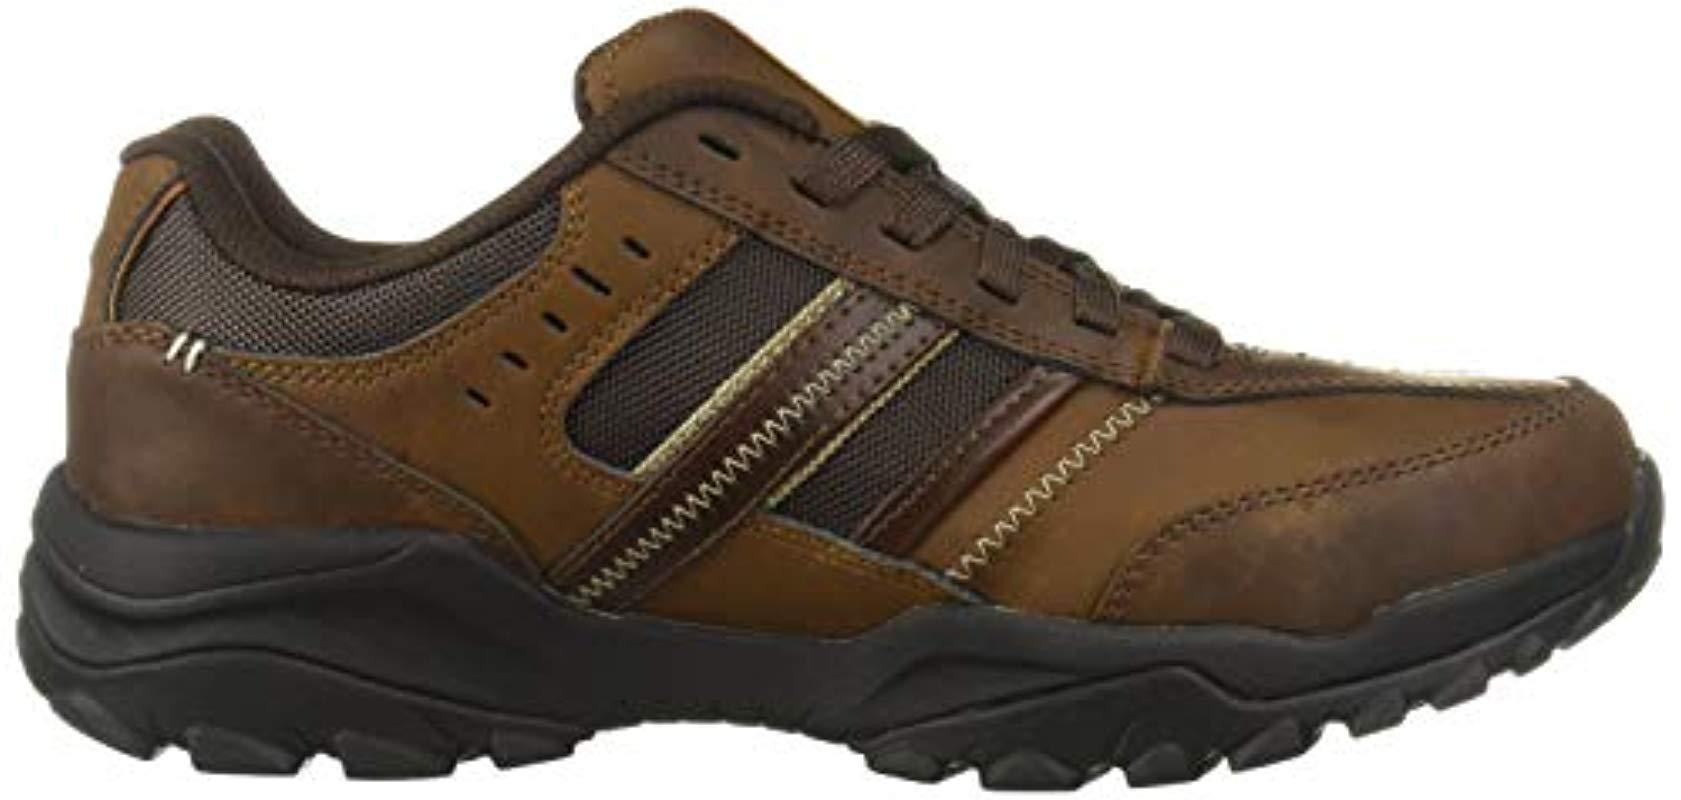 Save 45% Delwood Hi-top Trainers in Brown for Men Skechers Leather Henrick Mens Shoes Lace-ups Oxford shoes 